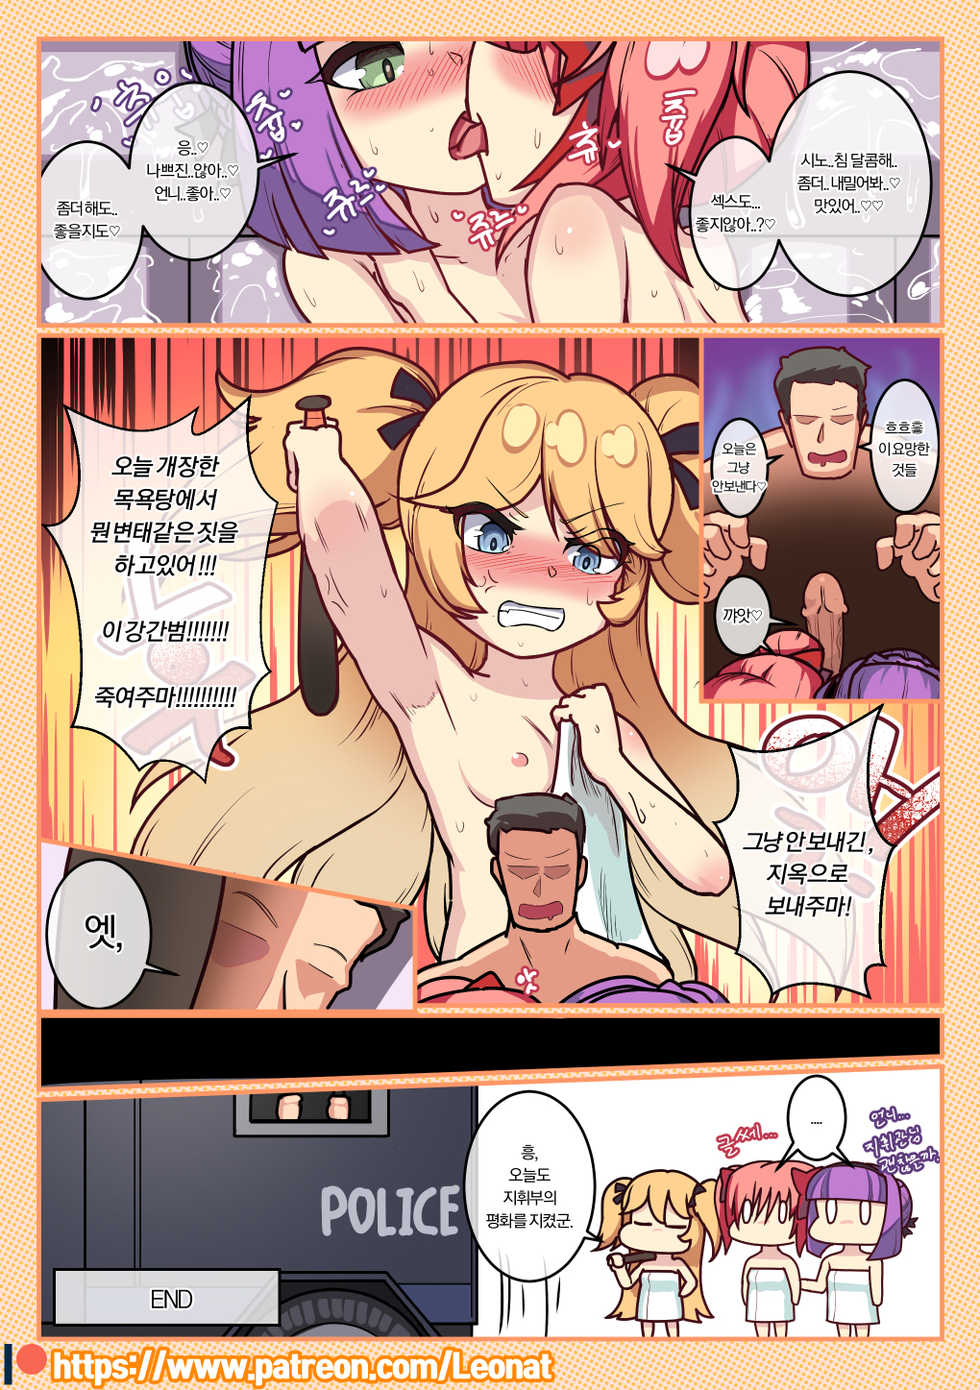 [Leonat] Another Frontline 5 - Blueberry & Strawberry (Girls' Frontline) [Korean] - Page 27